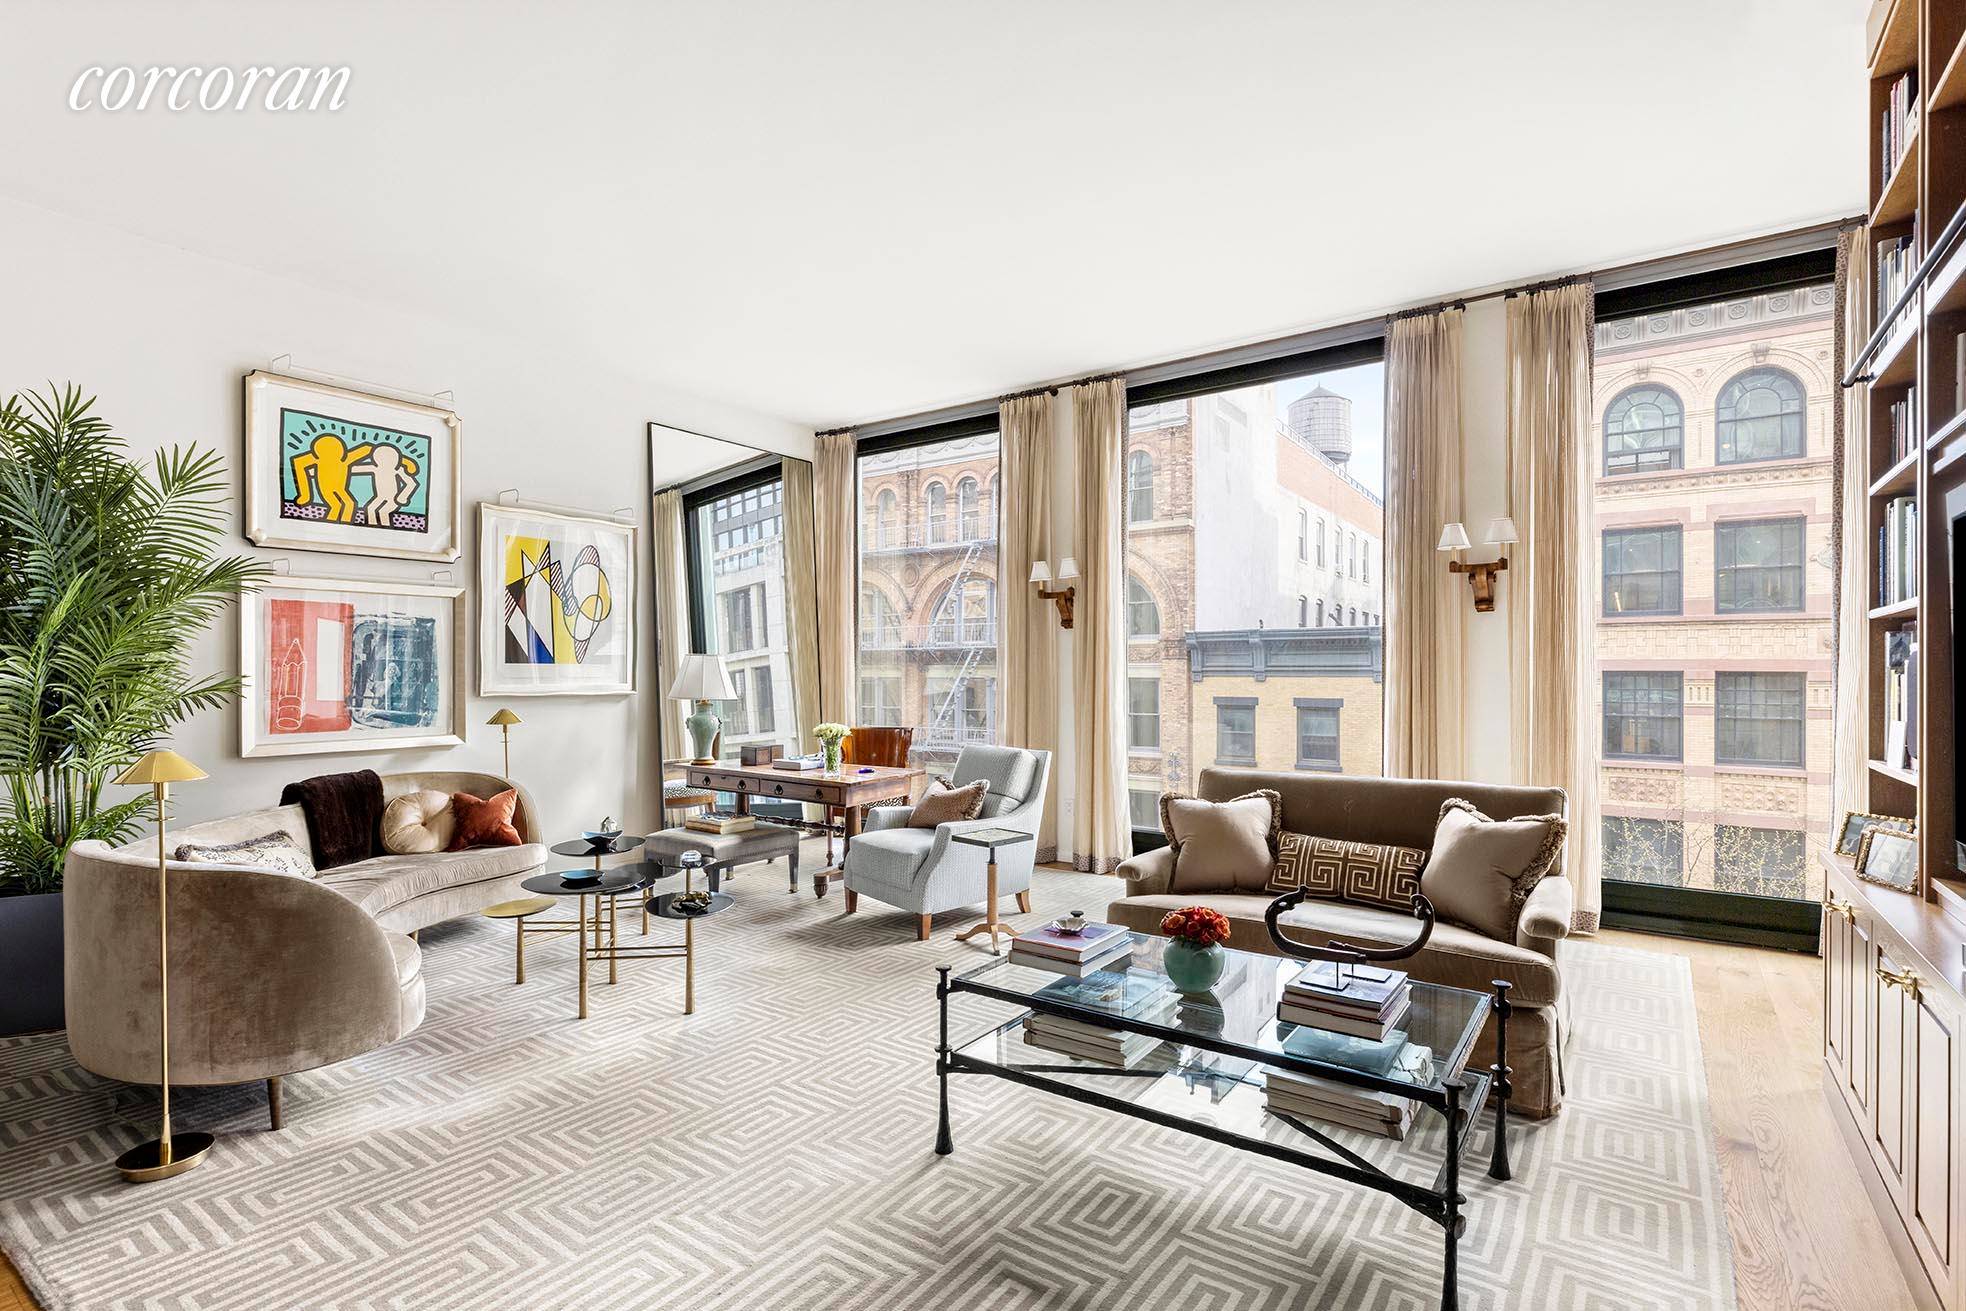 Residence 6A at 40 Bond Street Three Bedrooms Three Bathrooms Powder Room 2, 617 Sq Ft 40 Ft of Linear South Facing Windows on Bond Street Perfectly perched above cobblestoned ...